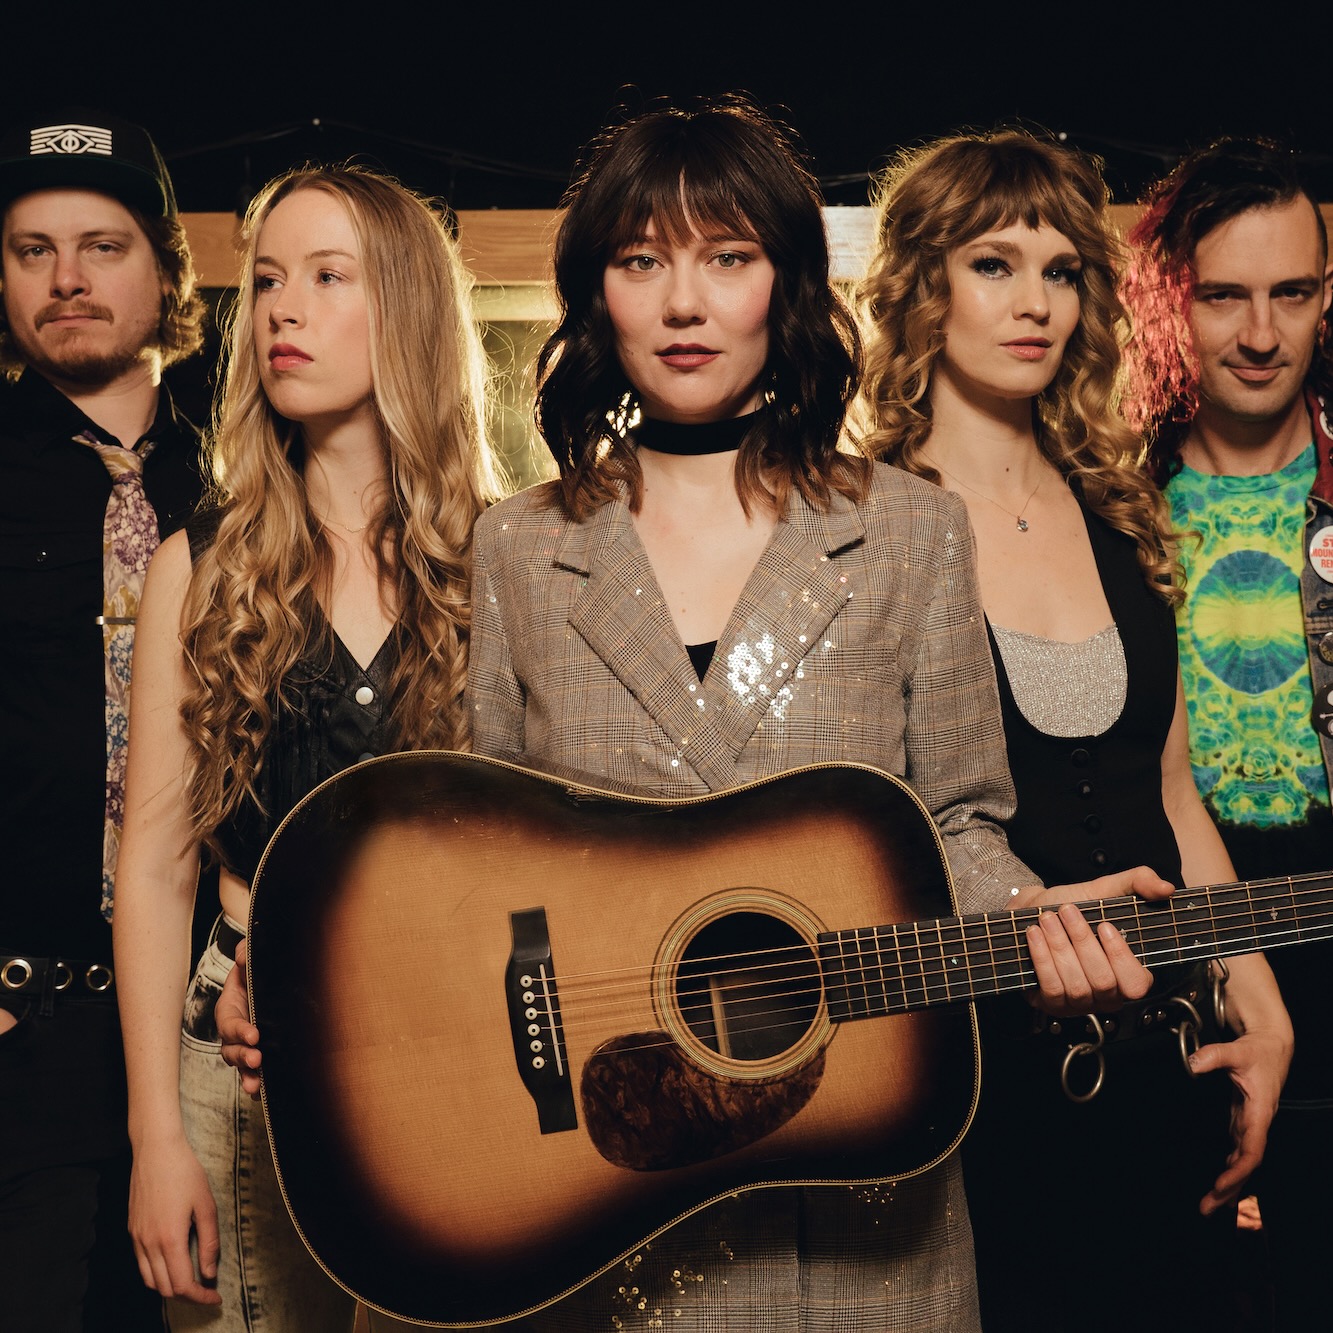 Preview: The BGS Scoop on AmericanaFest, September 19-23 in Nashville, TN